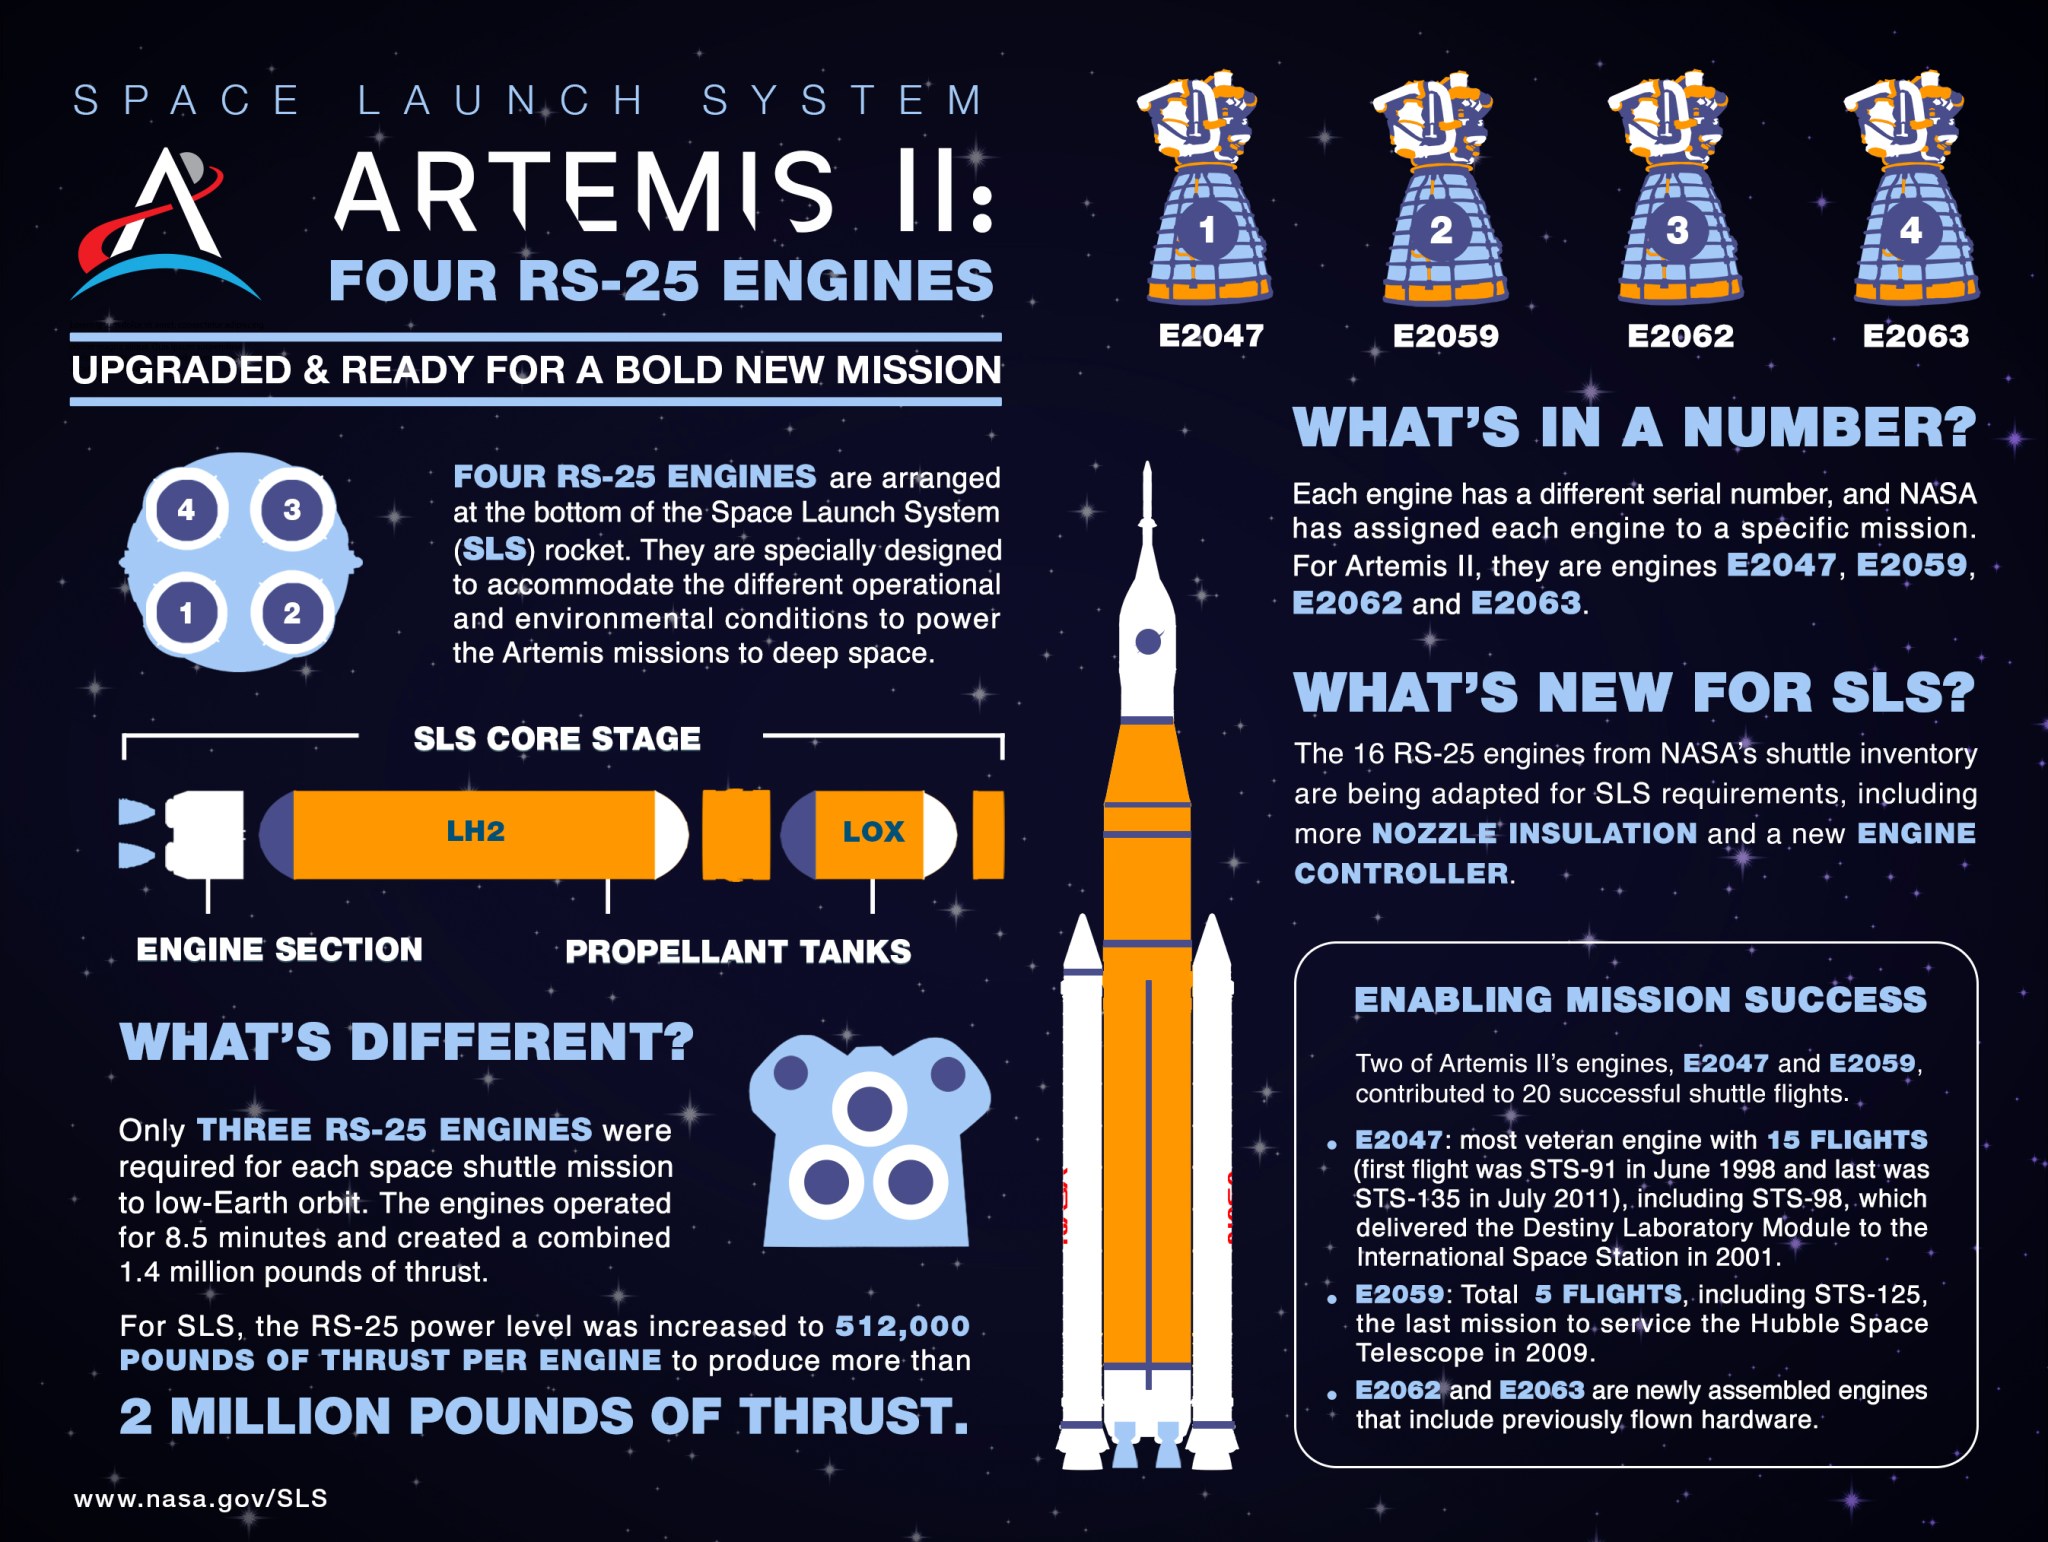 An info graphic of the Artemis II Space Launch System Rockets